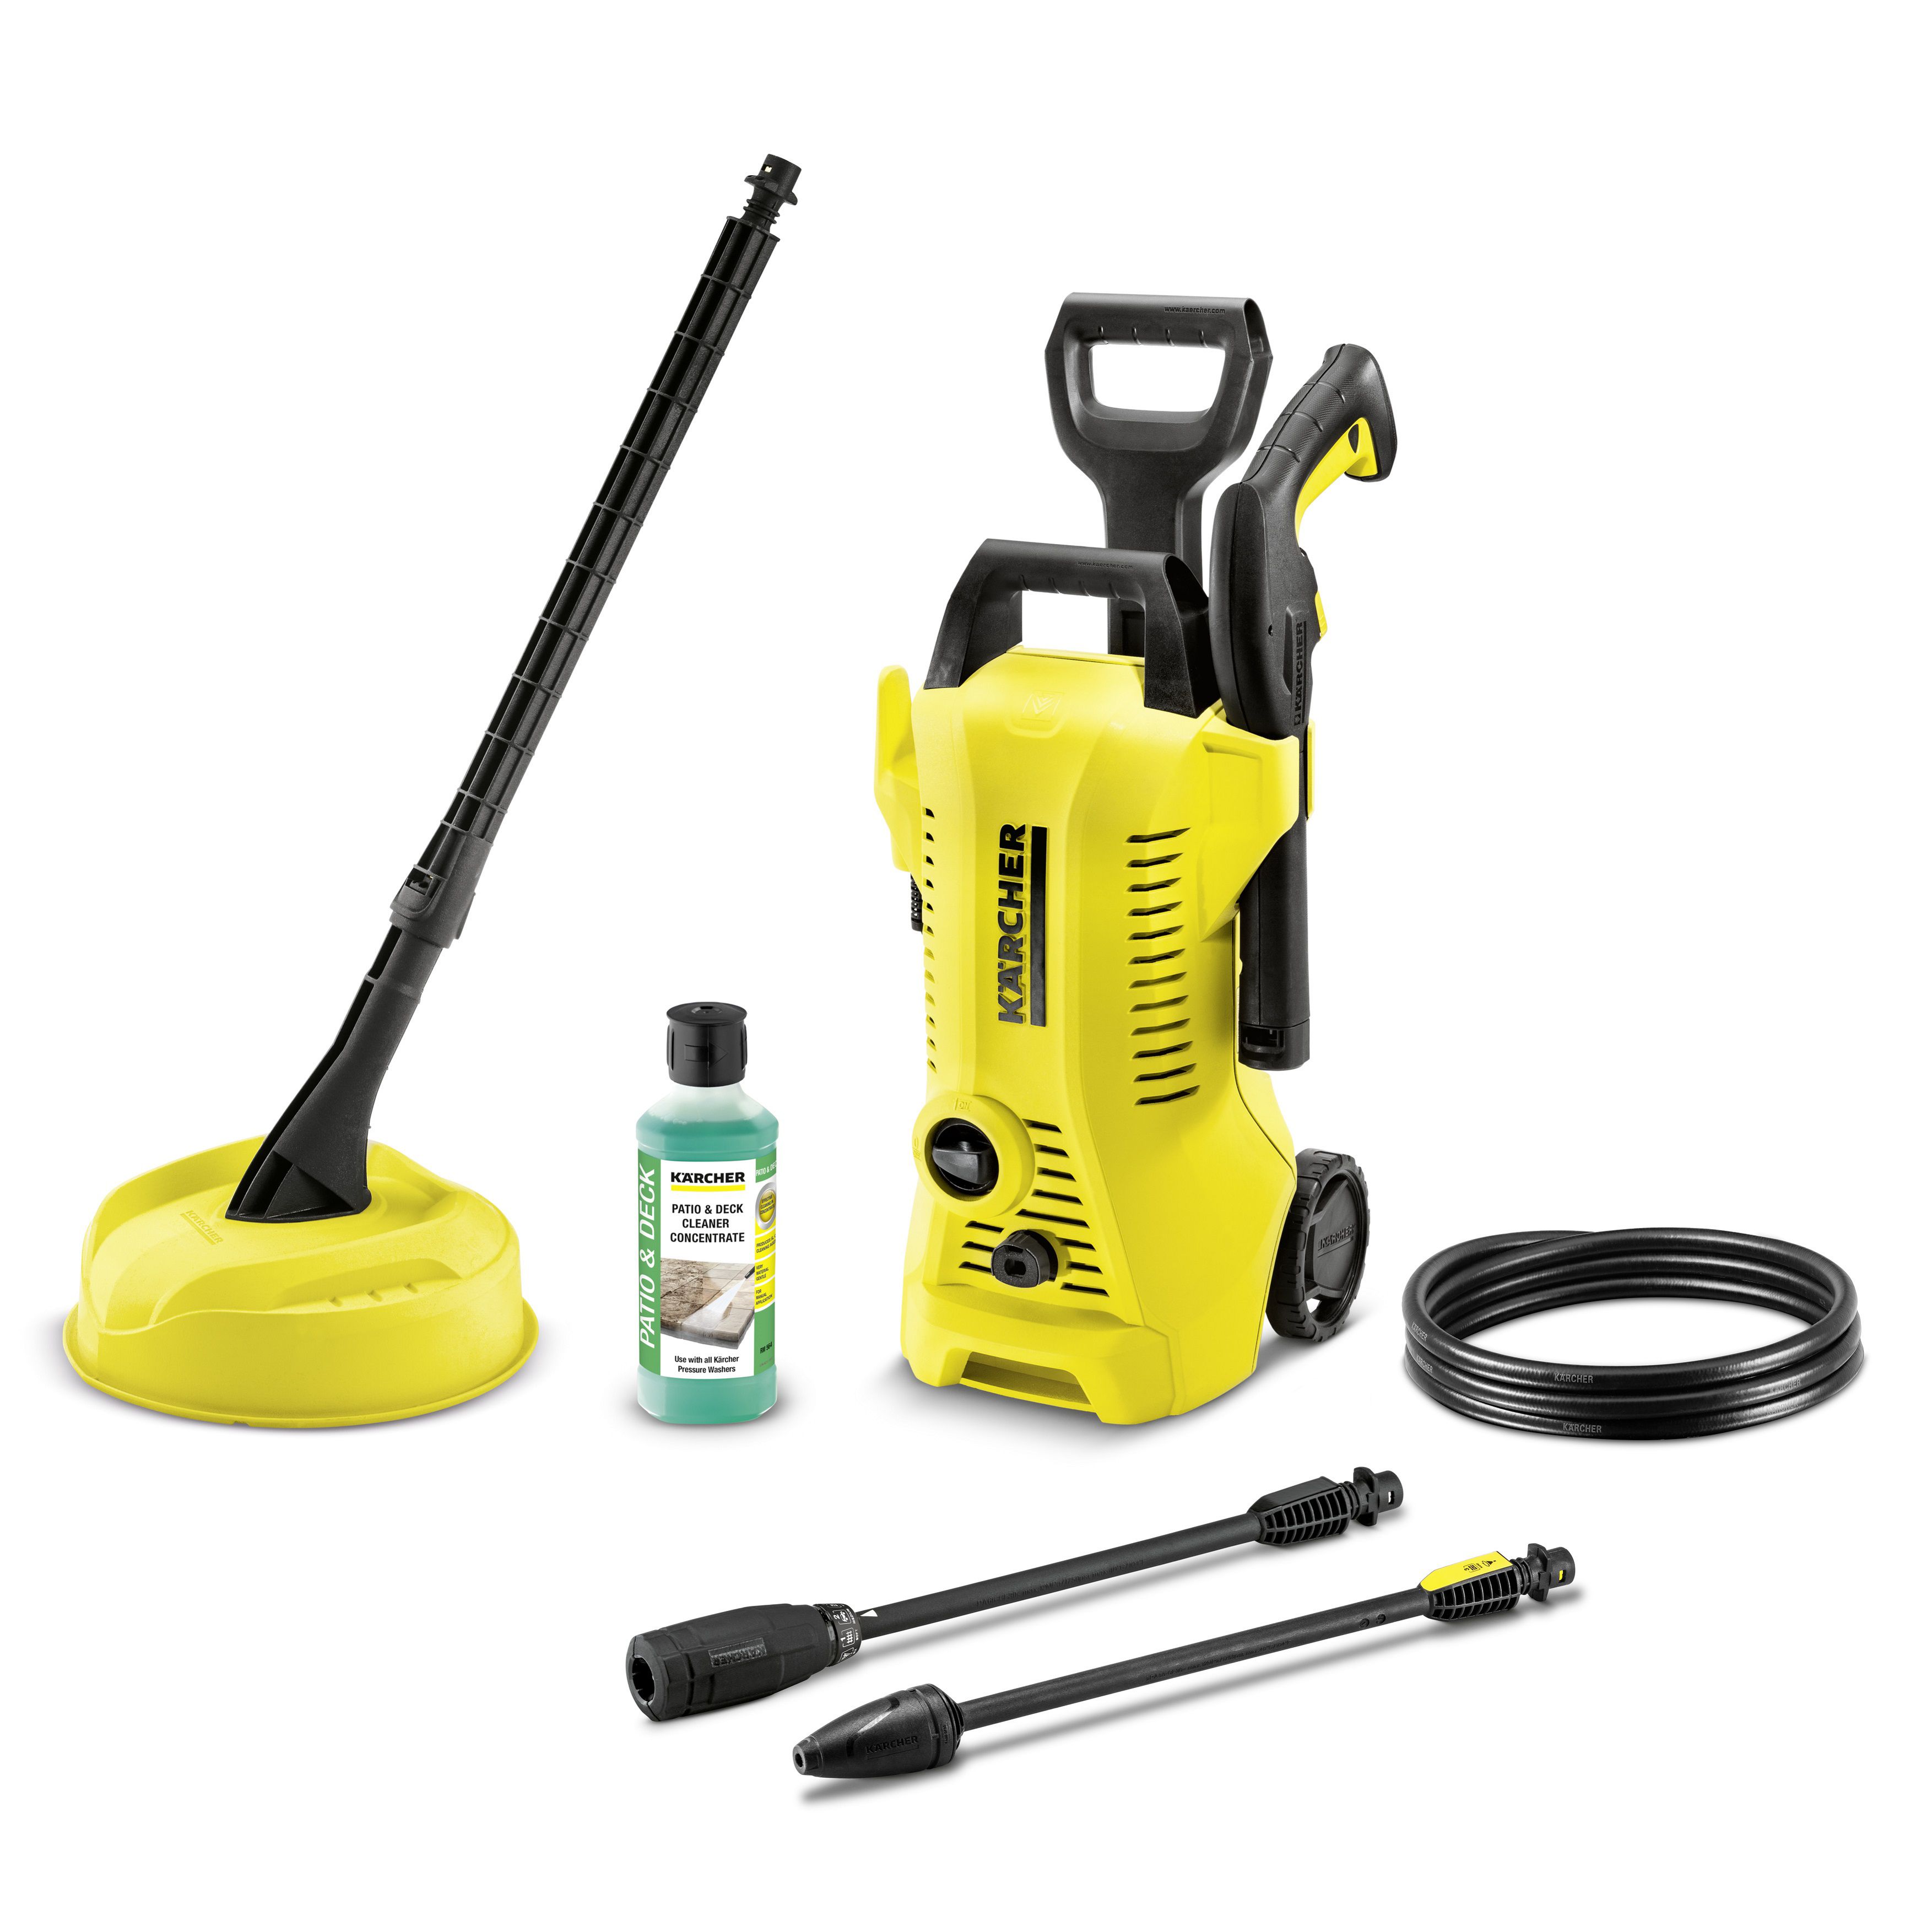 KARCHER K3 POWER CONTROL PRESSURE WASHER - 1 YEAR EXTRA WARRANTY (3 IN  TOTAL)